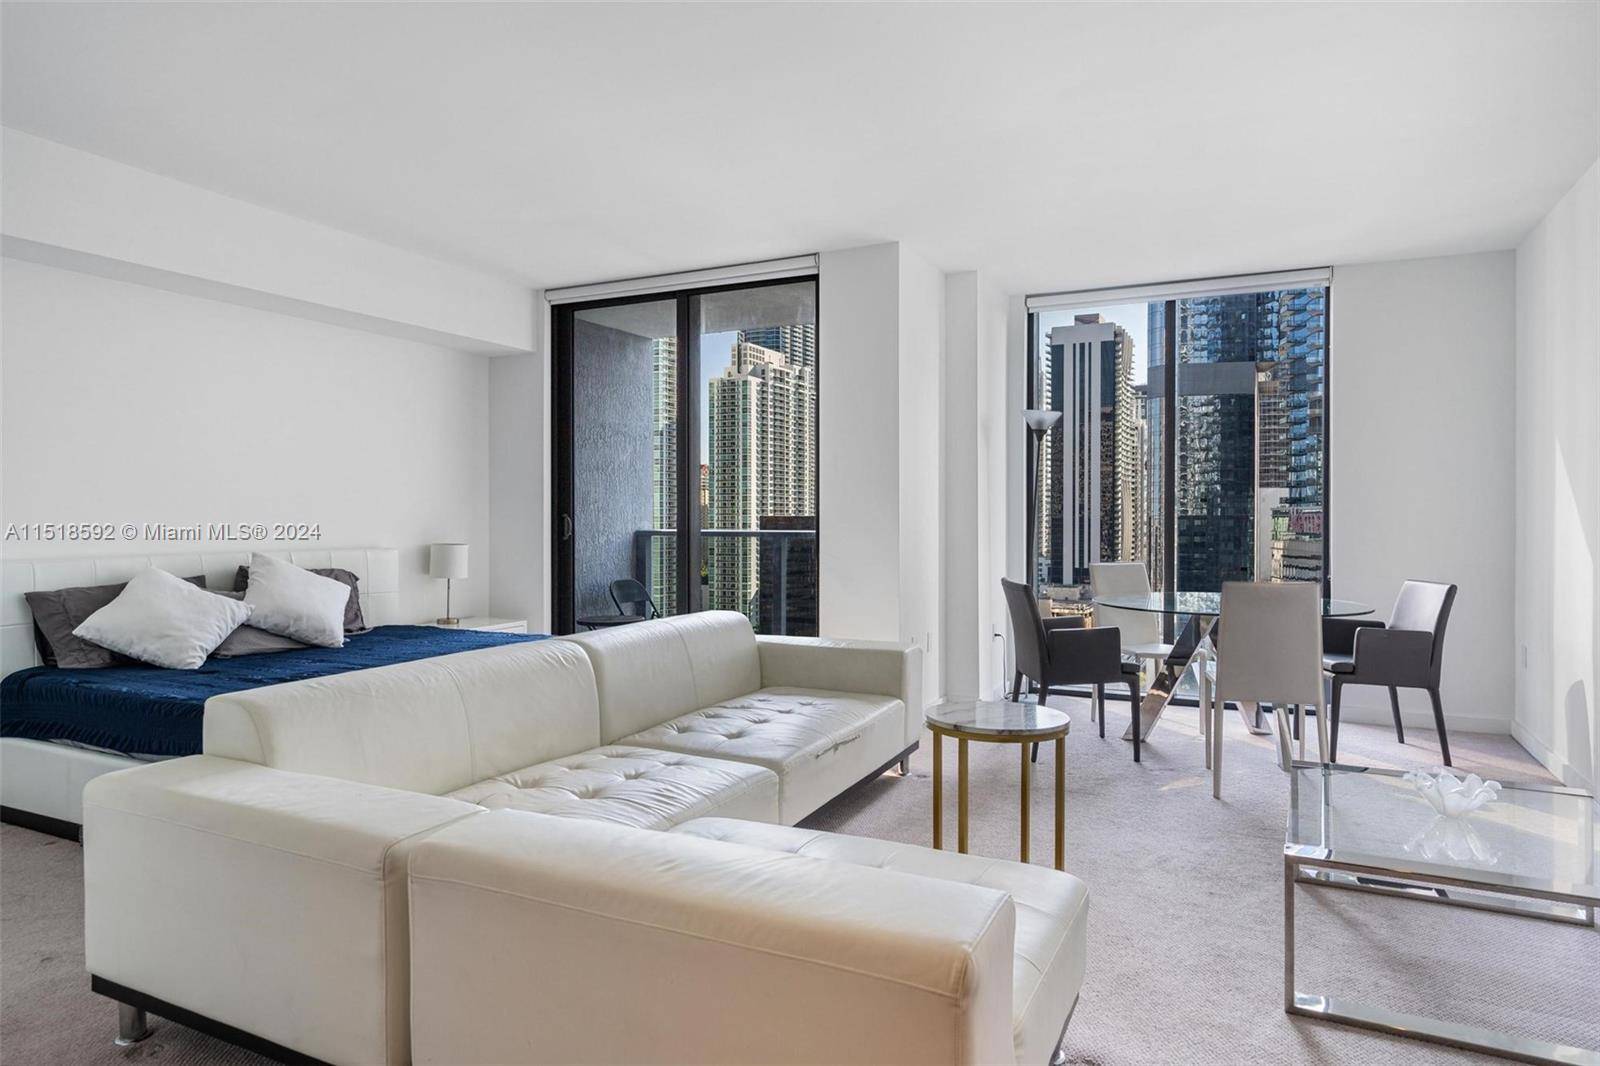 Beautiful Fully Furnished studio at MyBrickell Tower, a truly designer boutique building in the heart of Brickell.